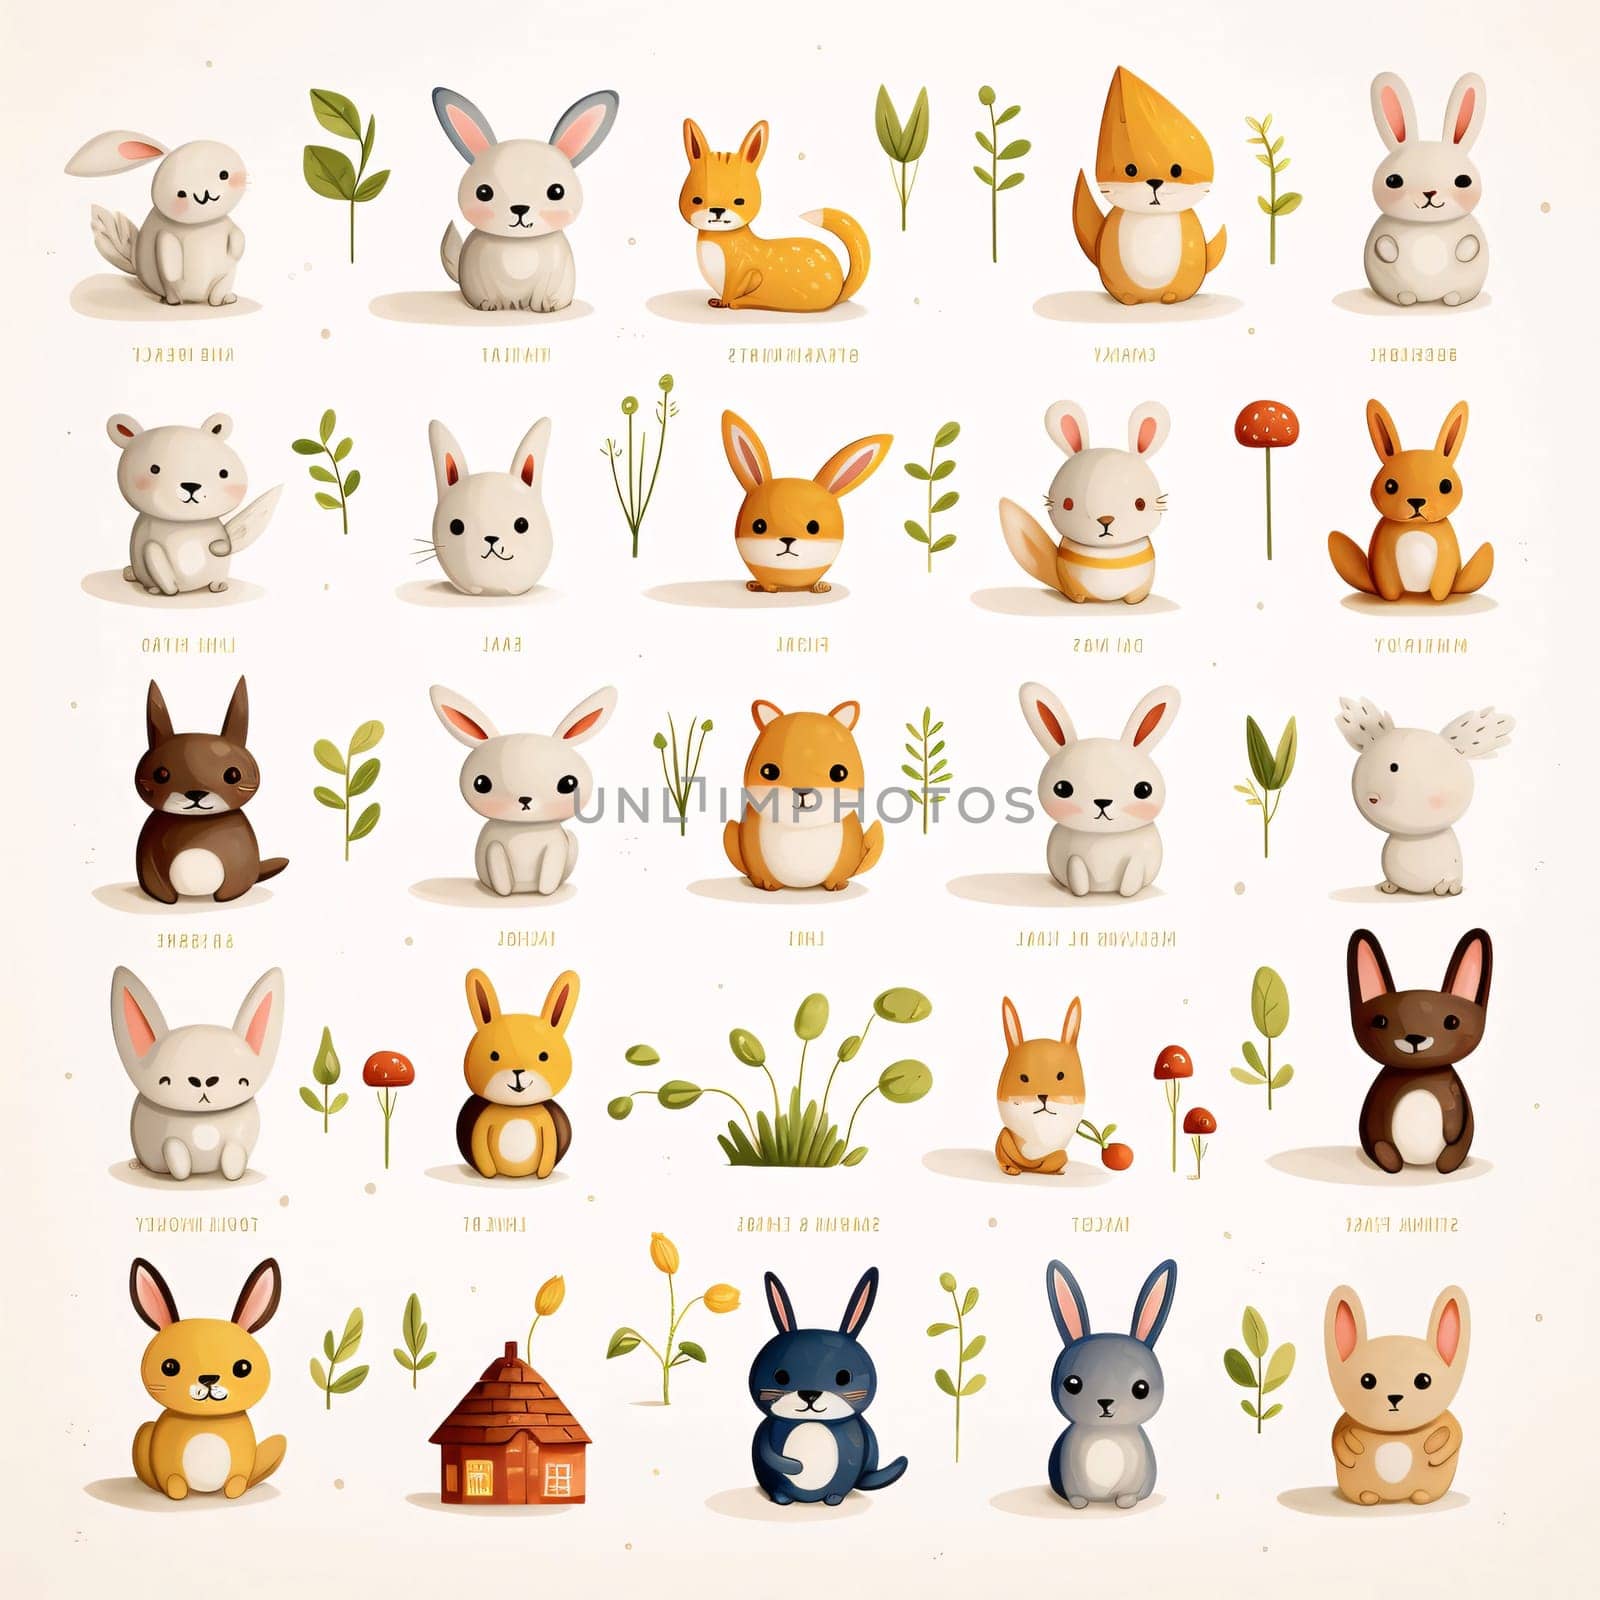 New icons collection: Cute cartoon animals set. Vector illustration. Set of cute animals.